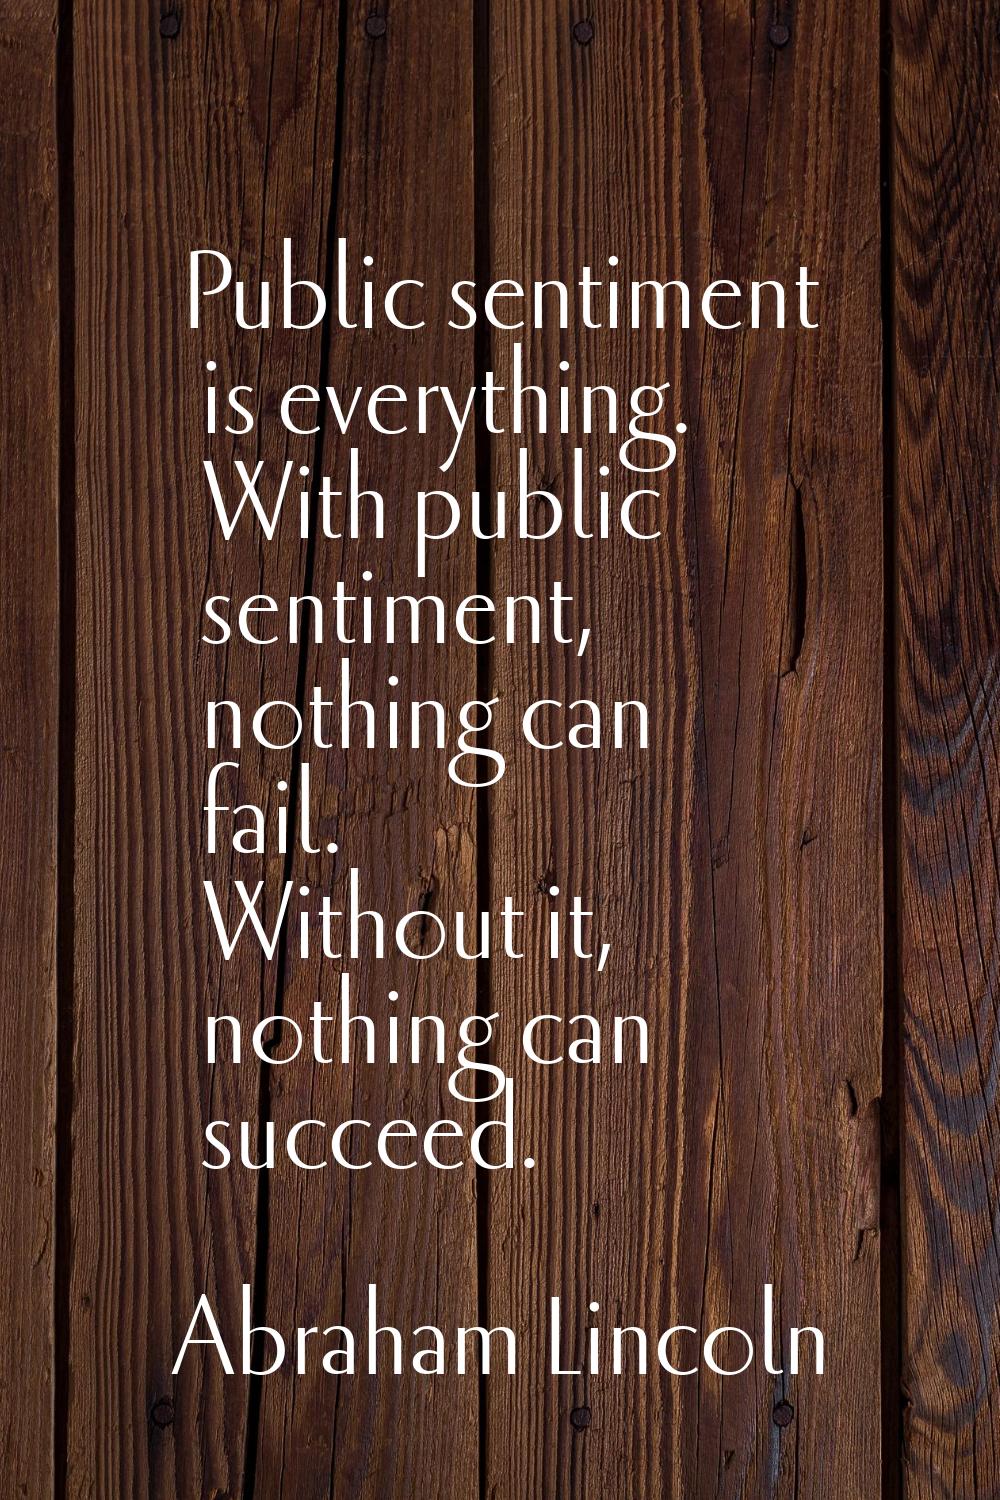 Public sentiment is everything. With public sentiment, nothing can fail. Without it, nothing can su